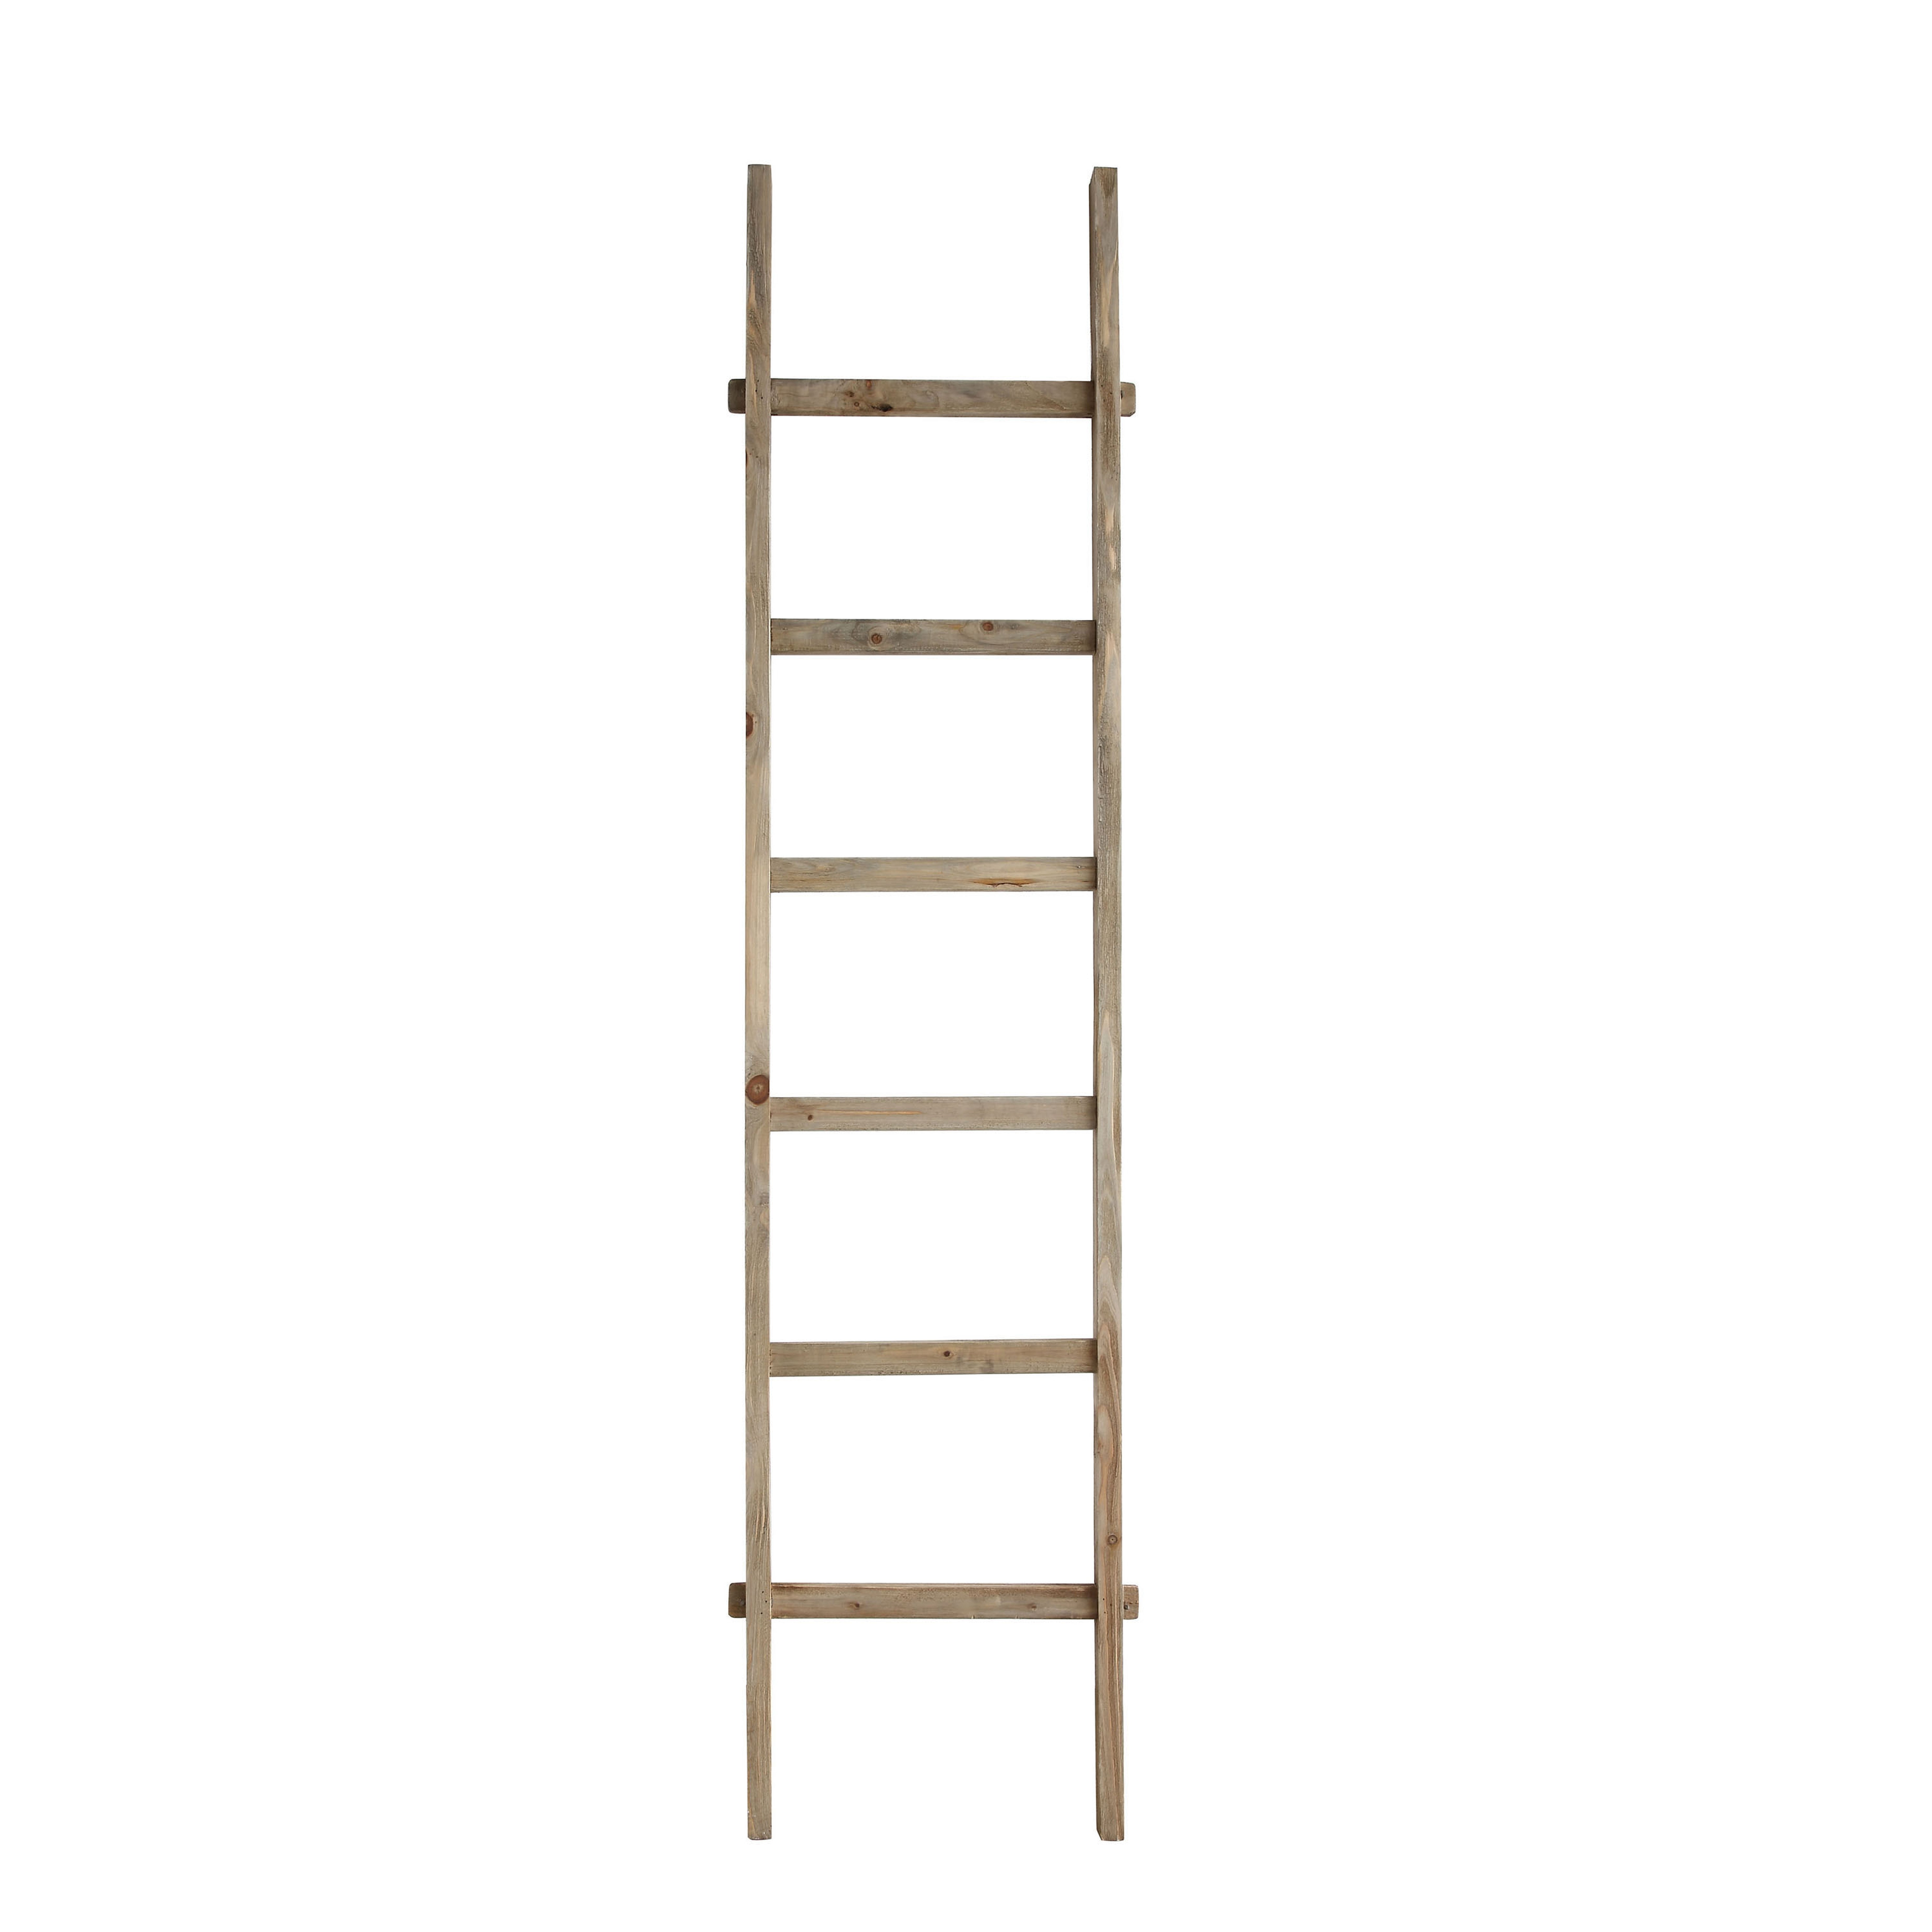 Rustic 76.75"H Decorative Fir Wood Ladder with 6 Rungs - Nomad Home